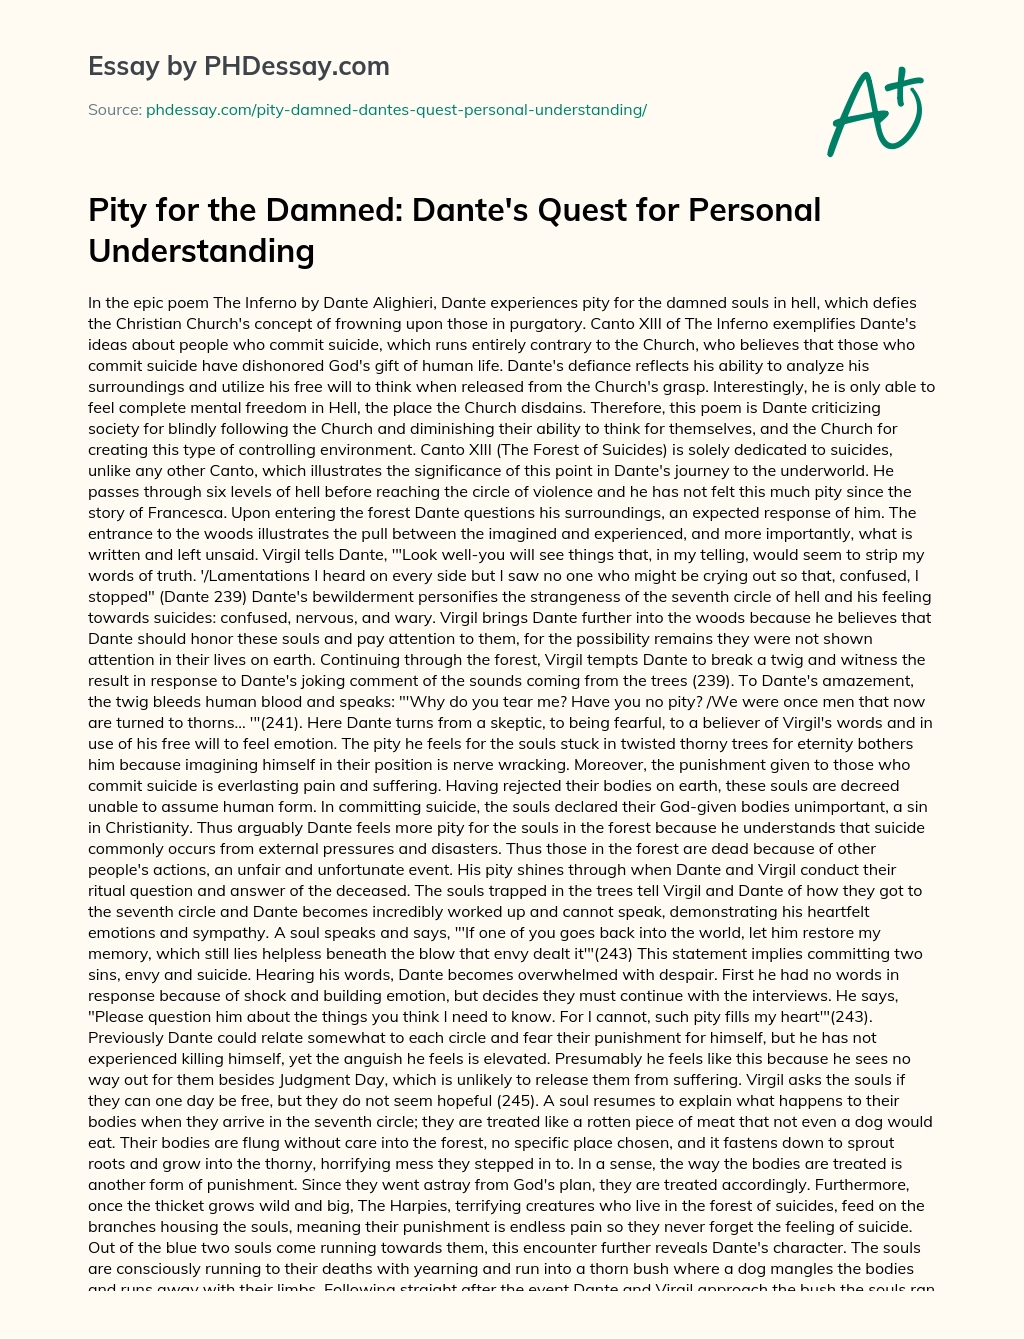 Pity for the Damned: Dante’s Quest for Personal Understanding essay